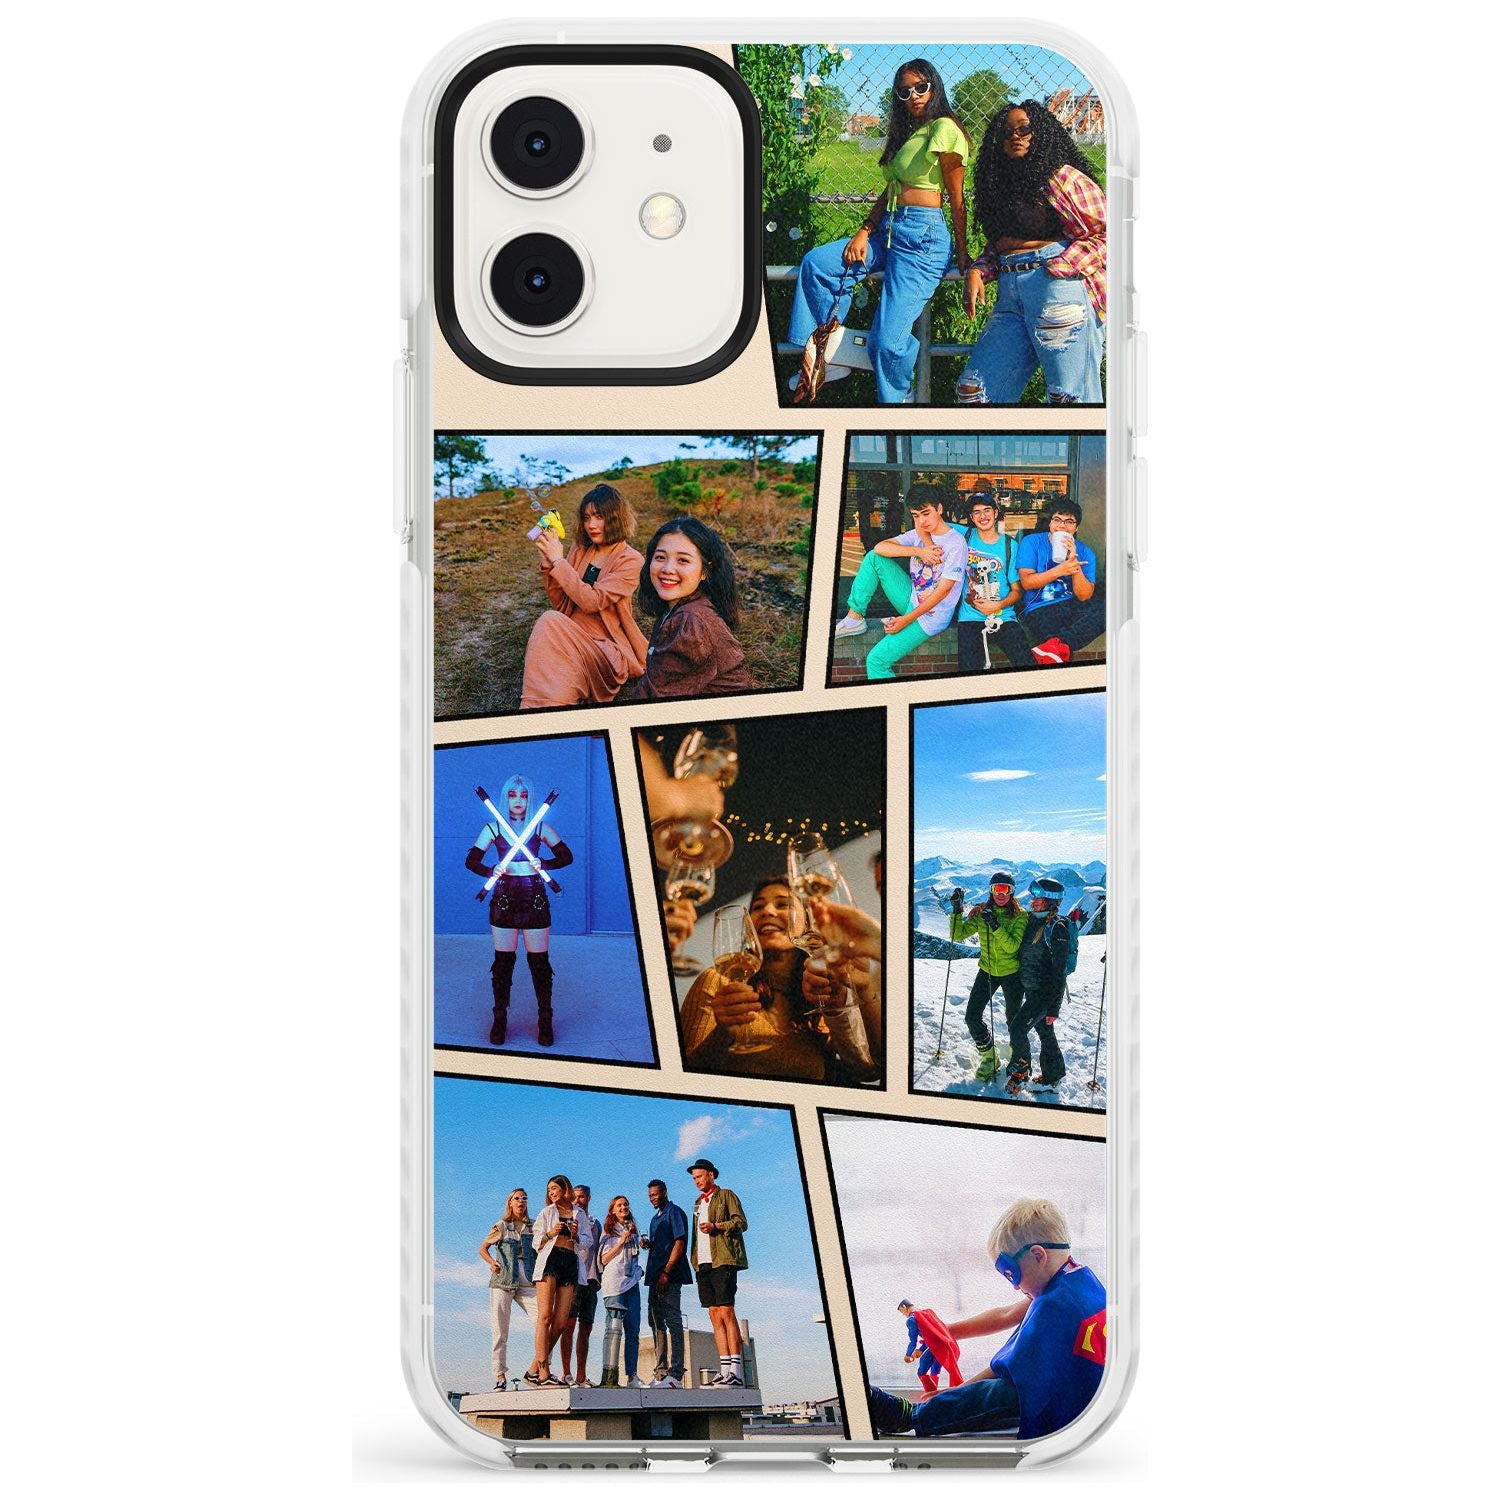 Comic Strip Photo Impact Phone Case for iPhone 11